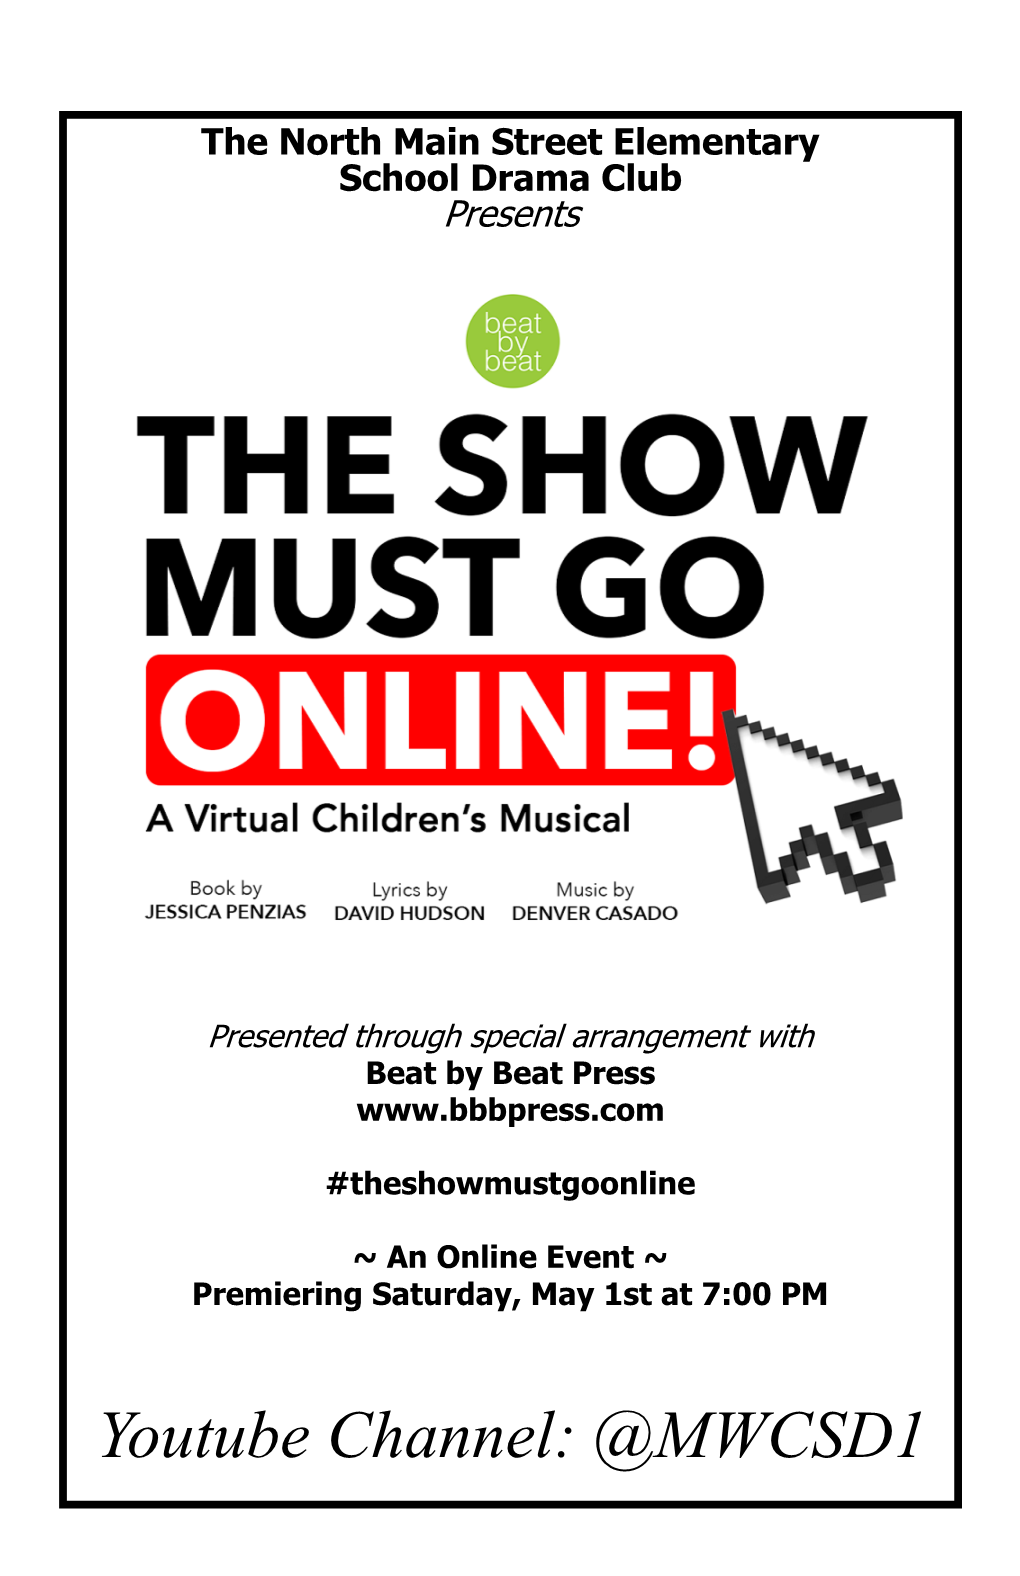 Program for the North Main Musical the Show Must Go Online